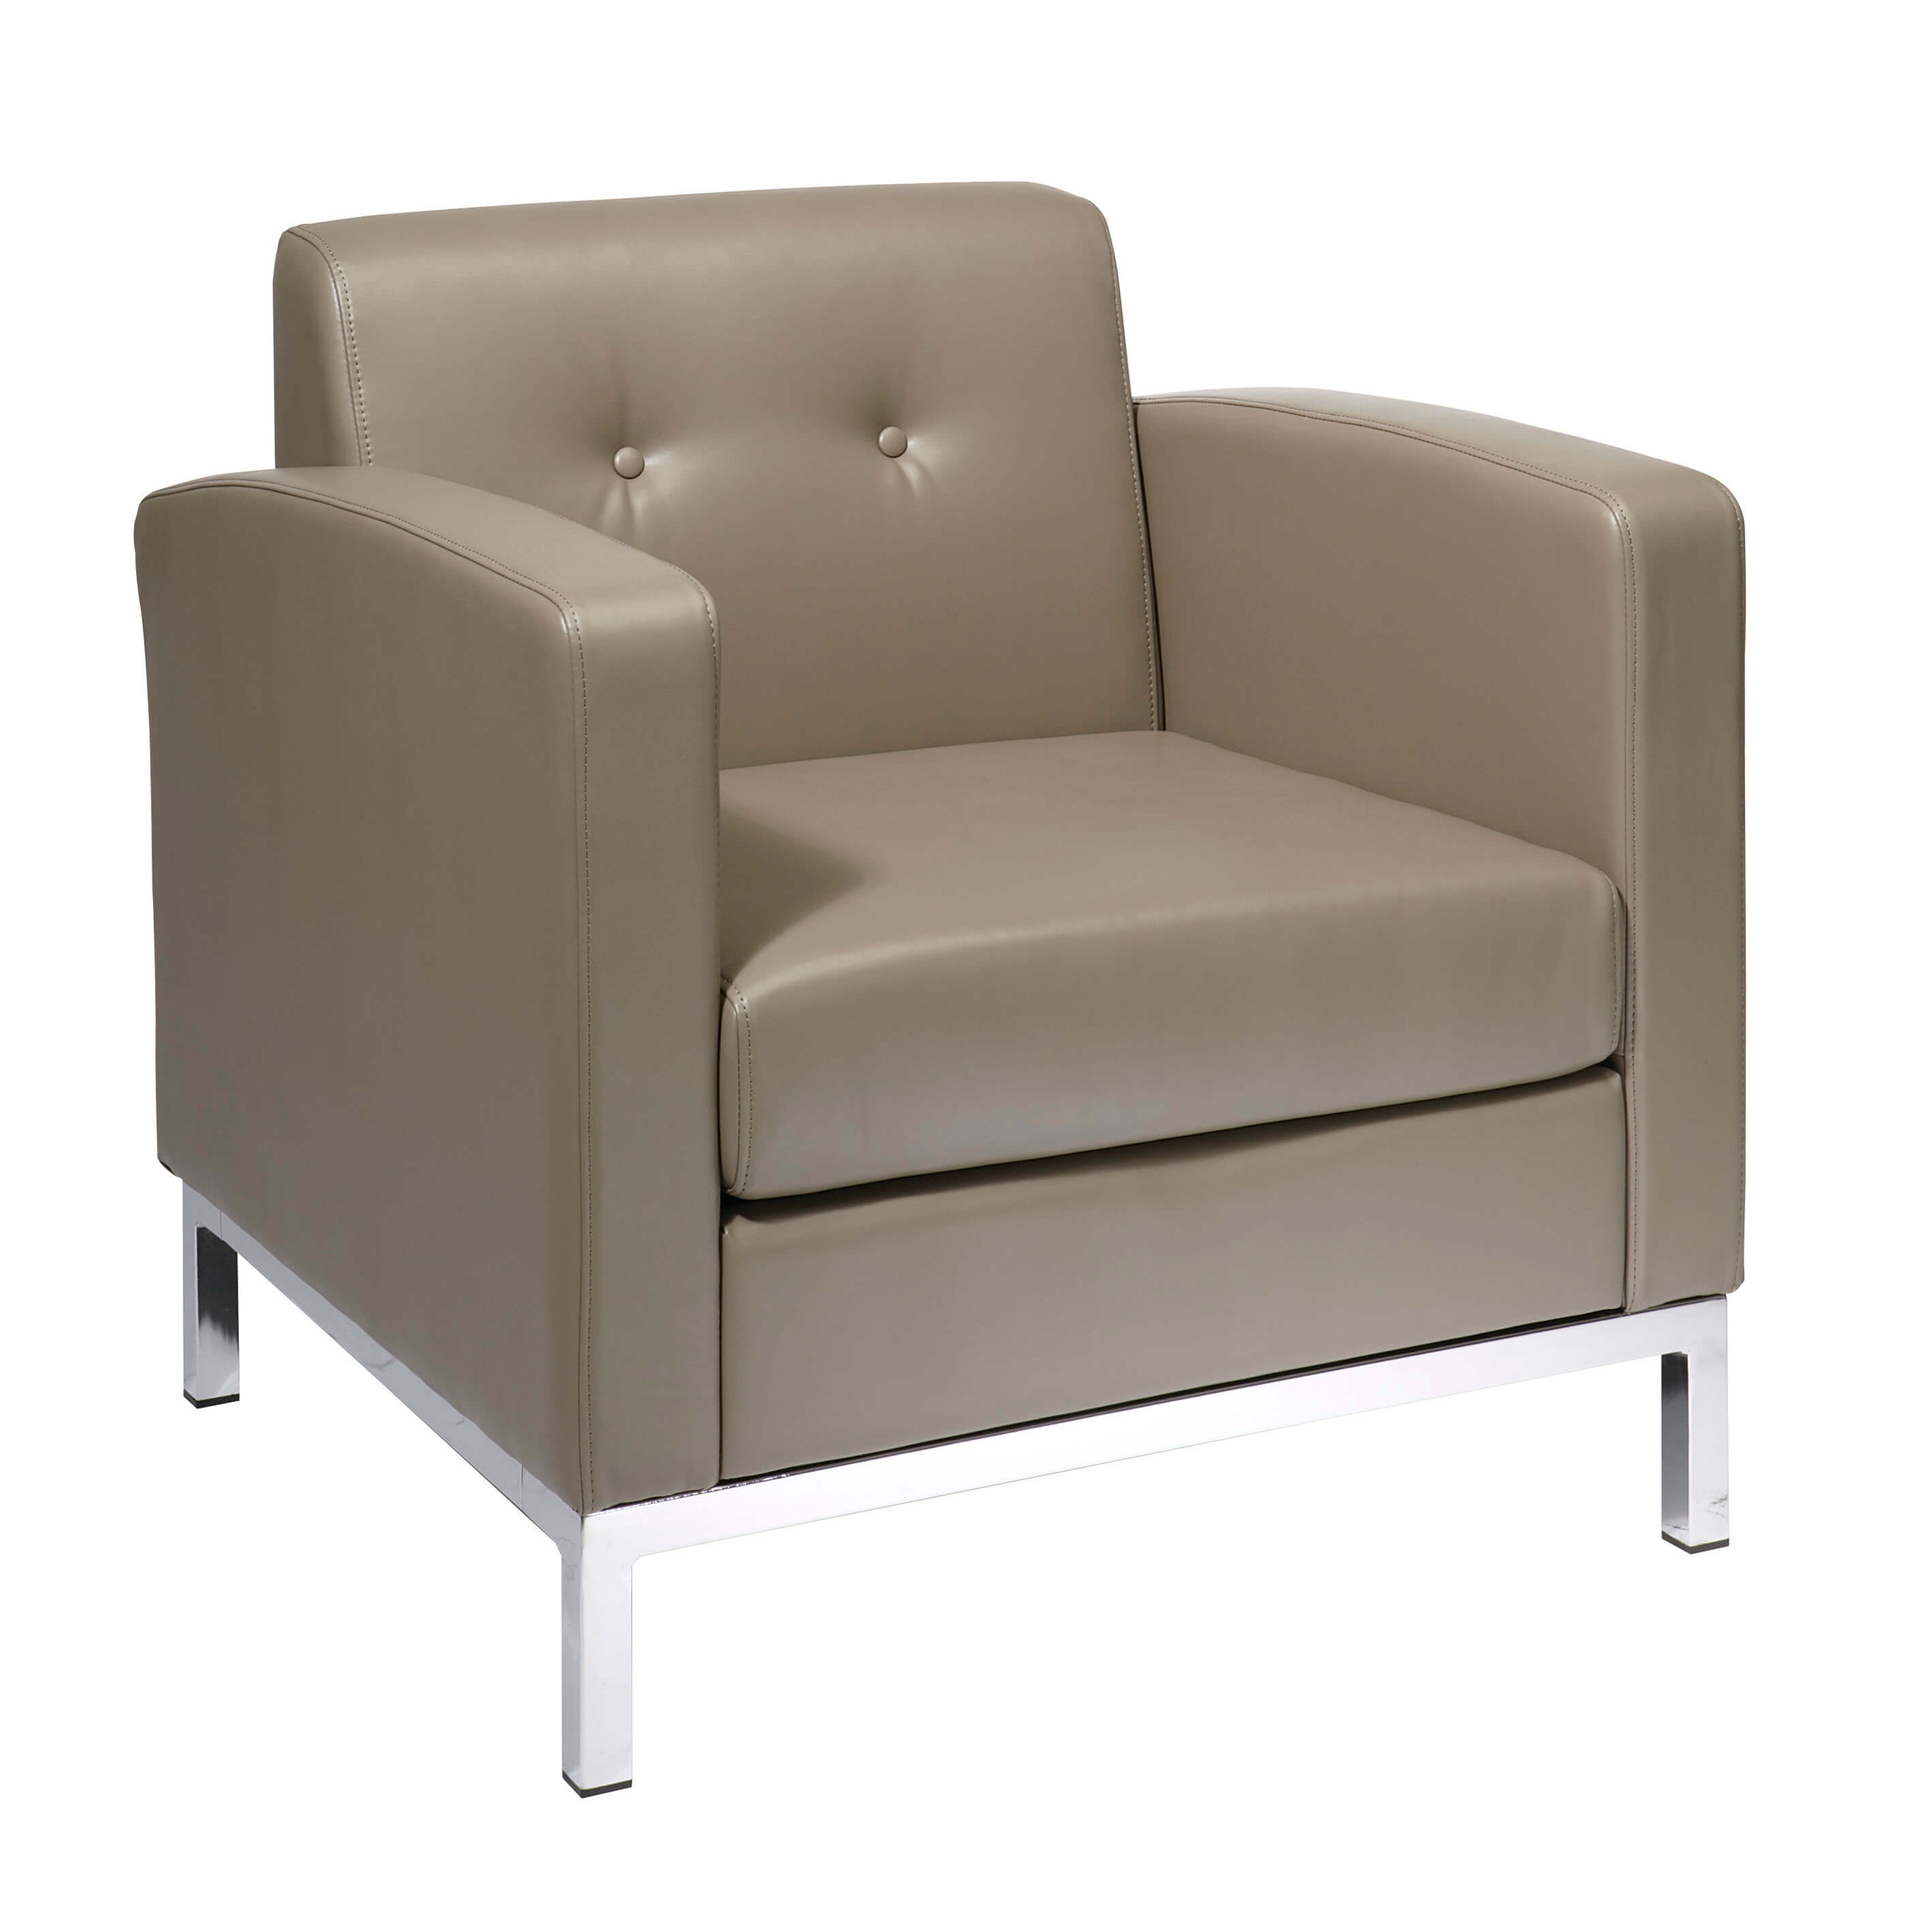 Office lounge chairs CUB WST51A U22 PSO